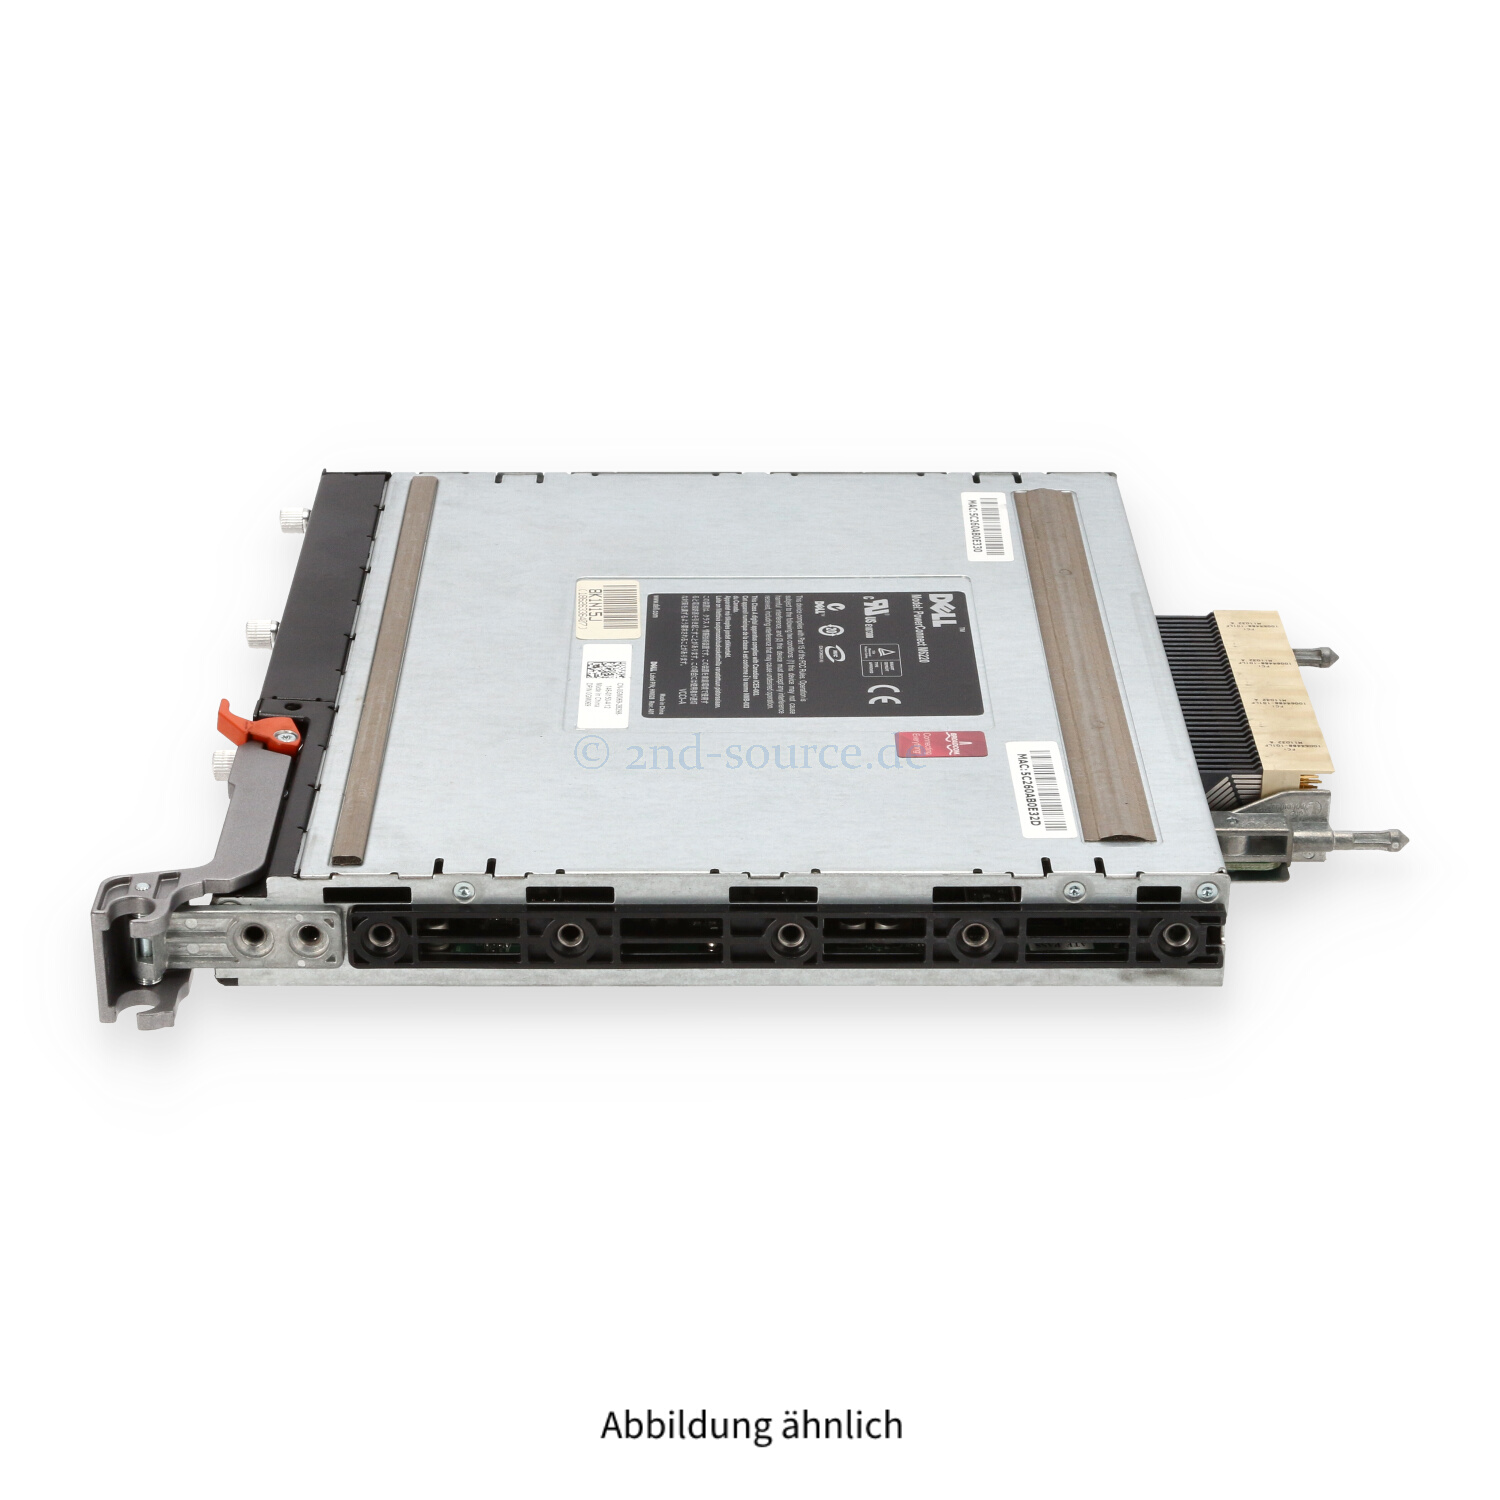 Dell PowerConnect M6220 4x 1GbE Blade Switch Module M1000e GM069 0GM069